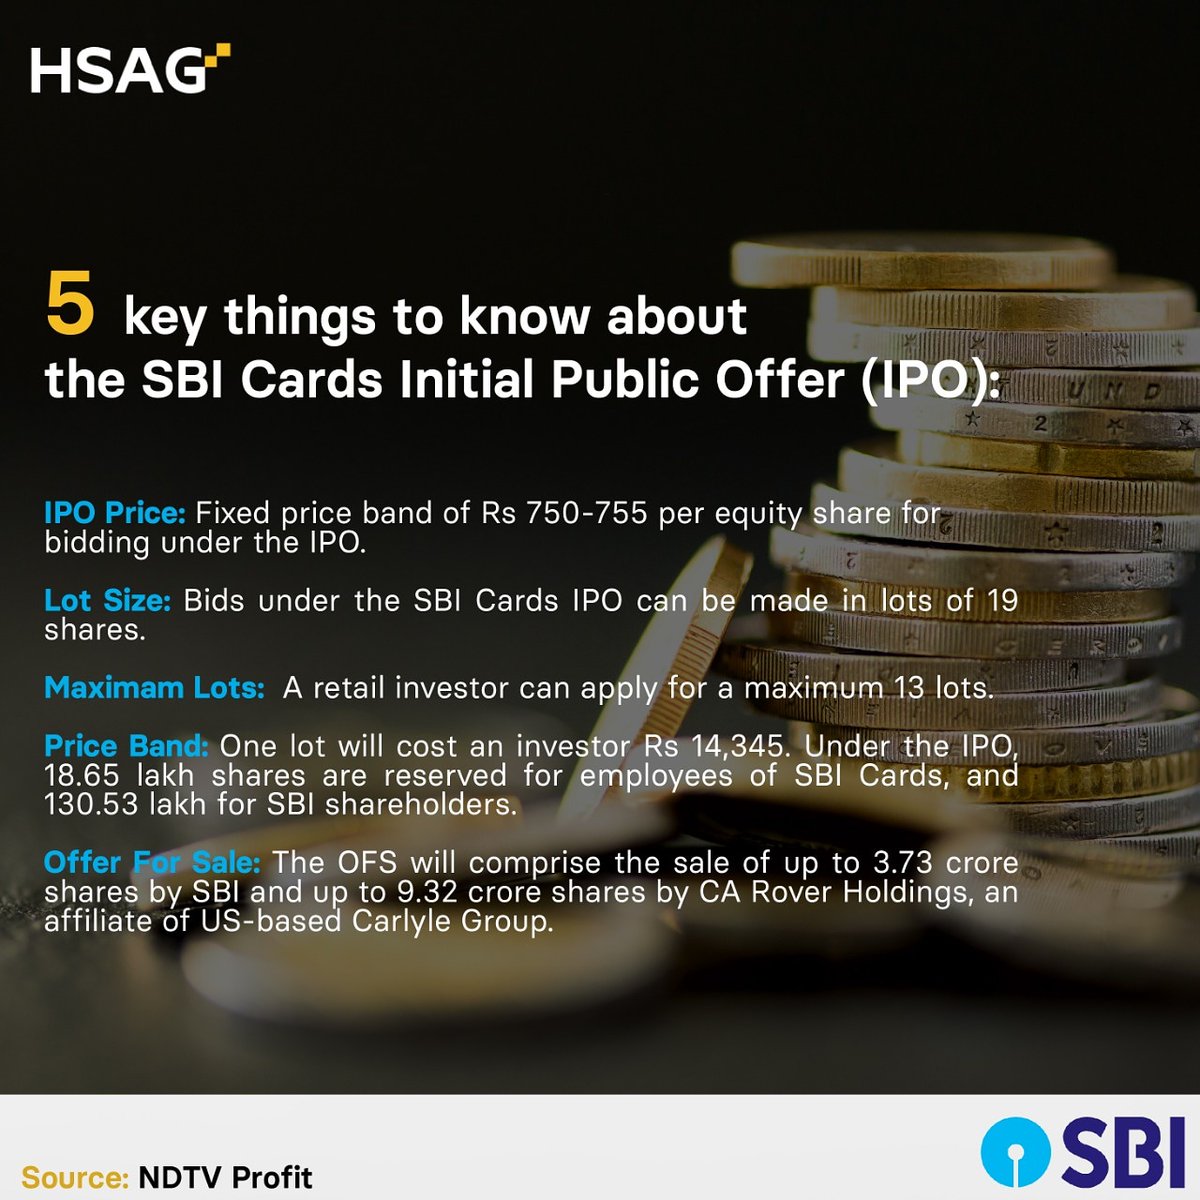 #Updates
SBI Card versus SBI: Experts say IPO a better bet than the Rs 2.7-lakh-cr mcap stock.
.
.
.
#hsag #hsagindia #newage
#sbi #sbipo #sbi2020 #sbiipo #sbibank #ipo #sbicard #share #shareholder #shares #economy #market #investments #invest #retailinvestment #retailinvestors